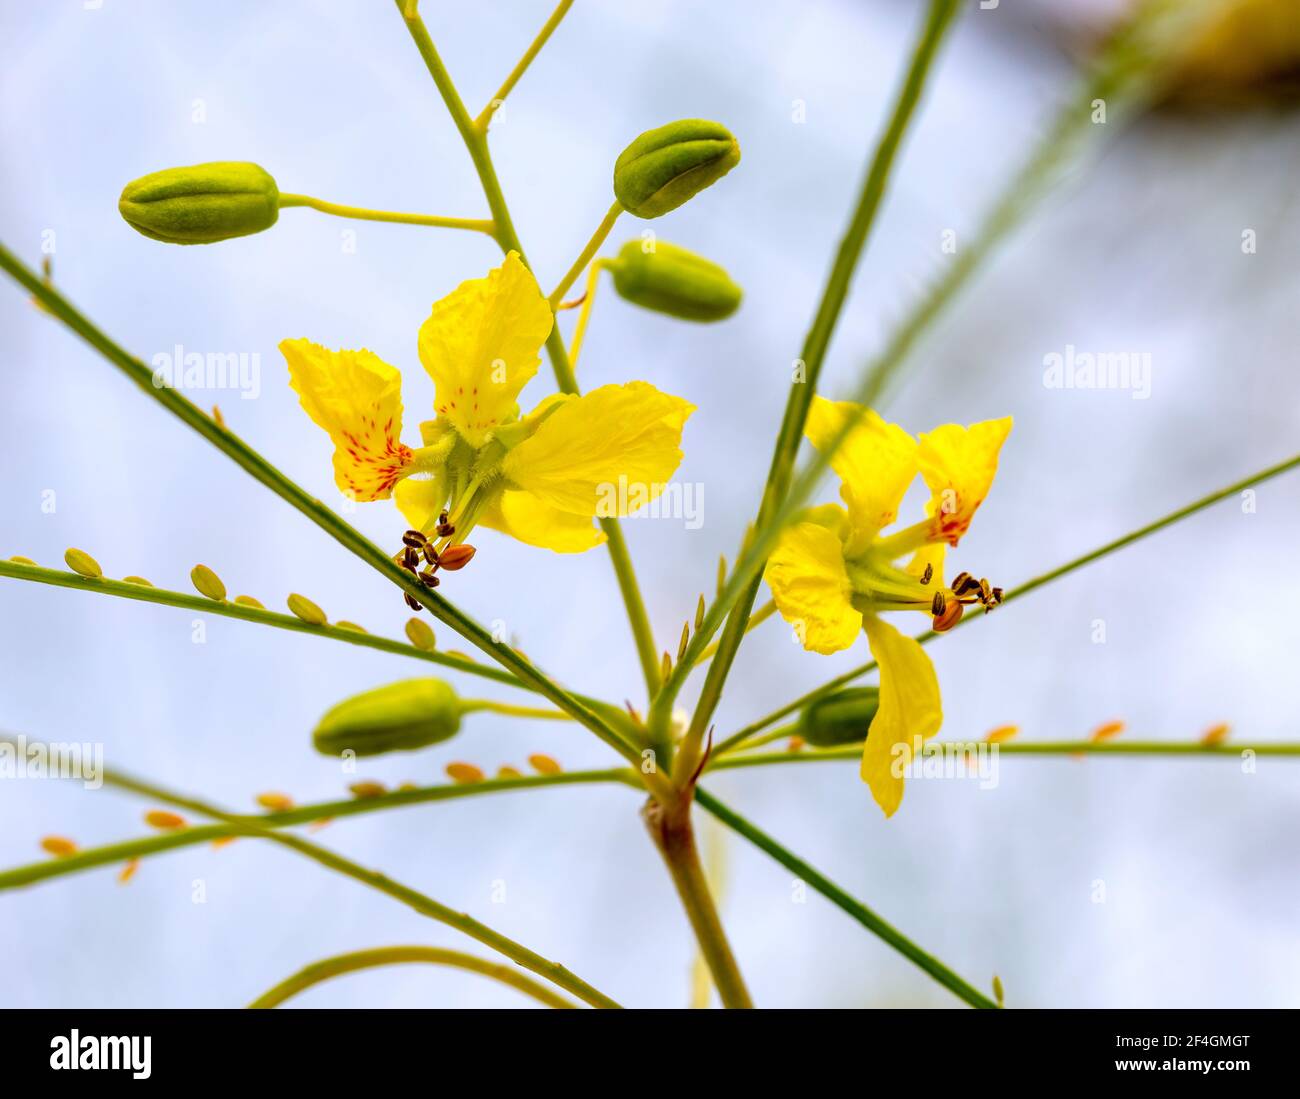 Yellow flowers of a Jerusalem thorn tree or Palo Verde (Parkinsonia aculeata) in a park in Granada Stock Photo